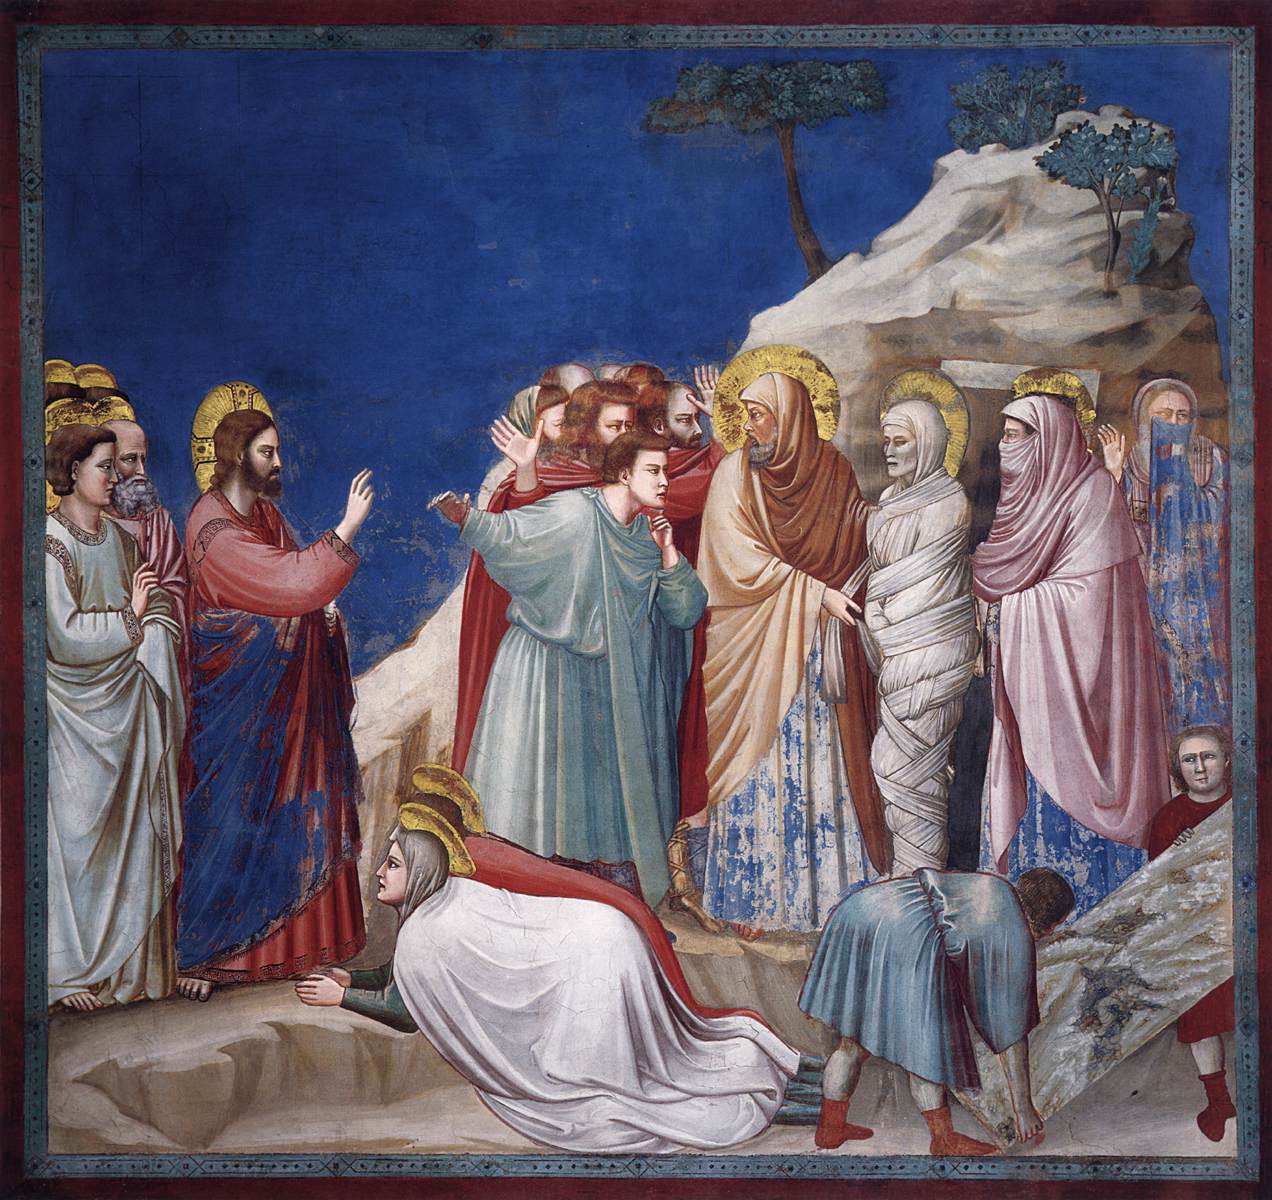 No 25 Scenes from the Life of Christ: 9 Raising of Lazarus